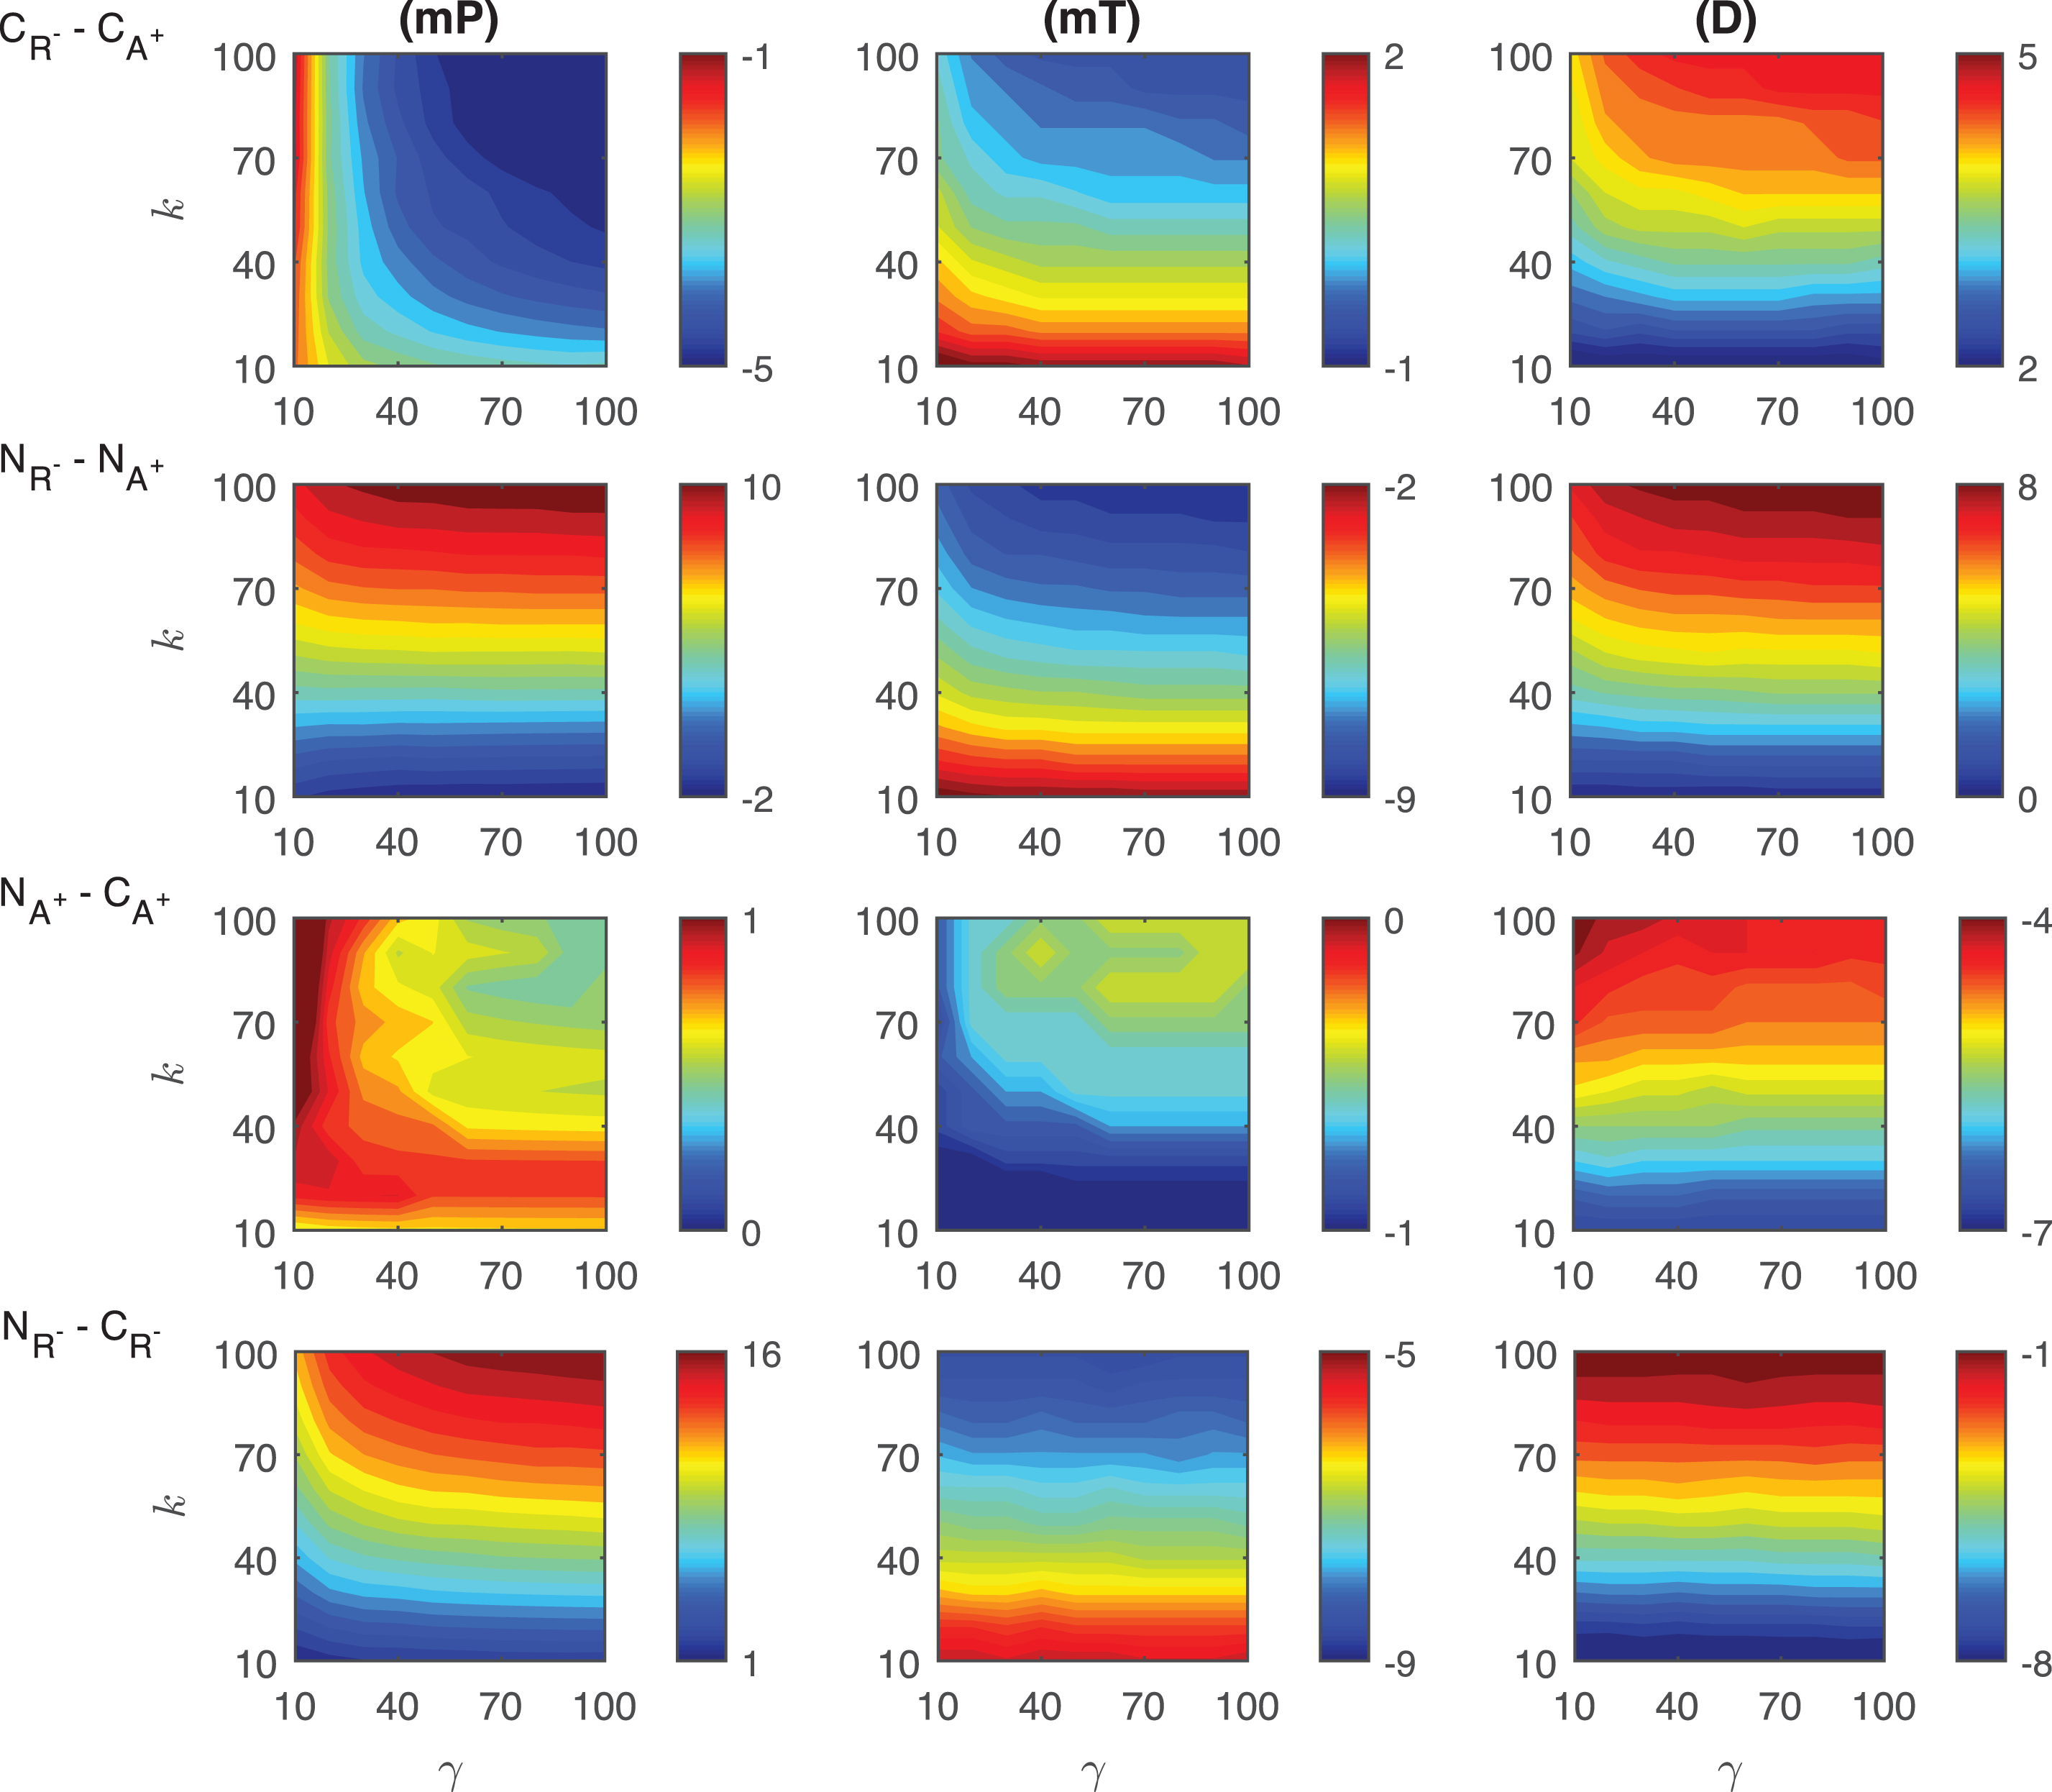 Heat maps for the comparison of the differences of three metrics (mid-protein level mP, time to reach mid-protein level mT and duration D) showing the dynamics of competitive (CA−, CR+) and noncompetitive (NA−, NR+) inhibition mechanisms. For all these simulations, the signal amplitude γ and persistency k are changed from 10-100 fold when ro = 0.001 while all the other parameters were kept constant at their estimated values listed in Section 3.